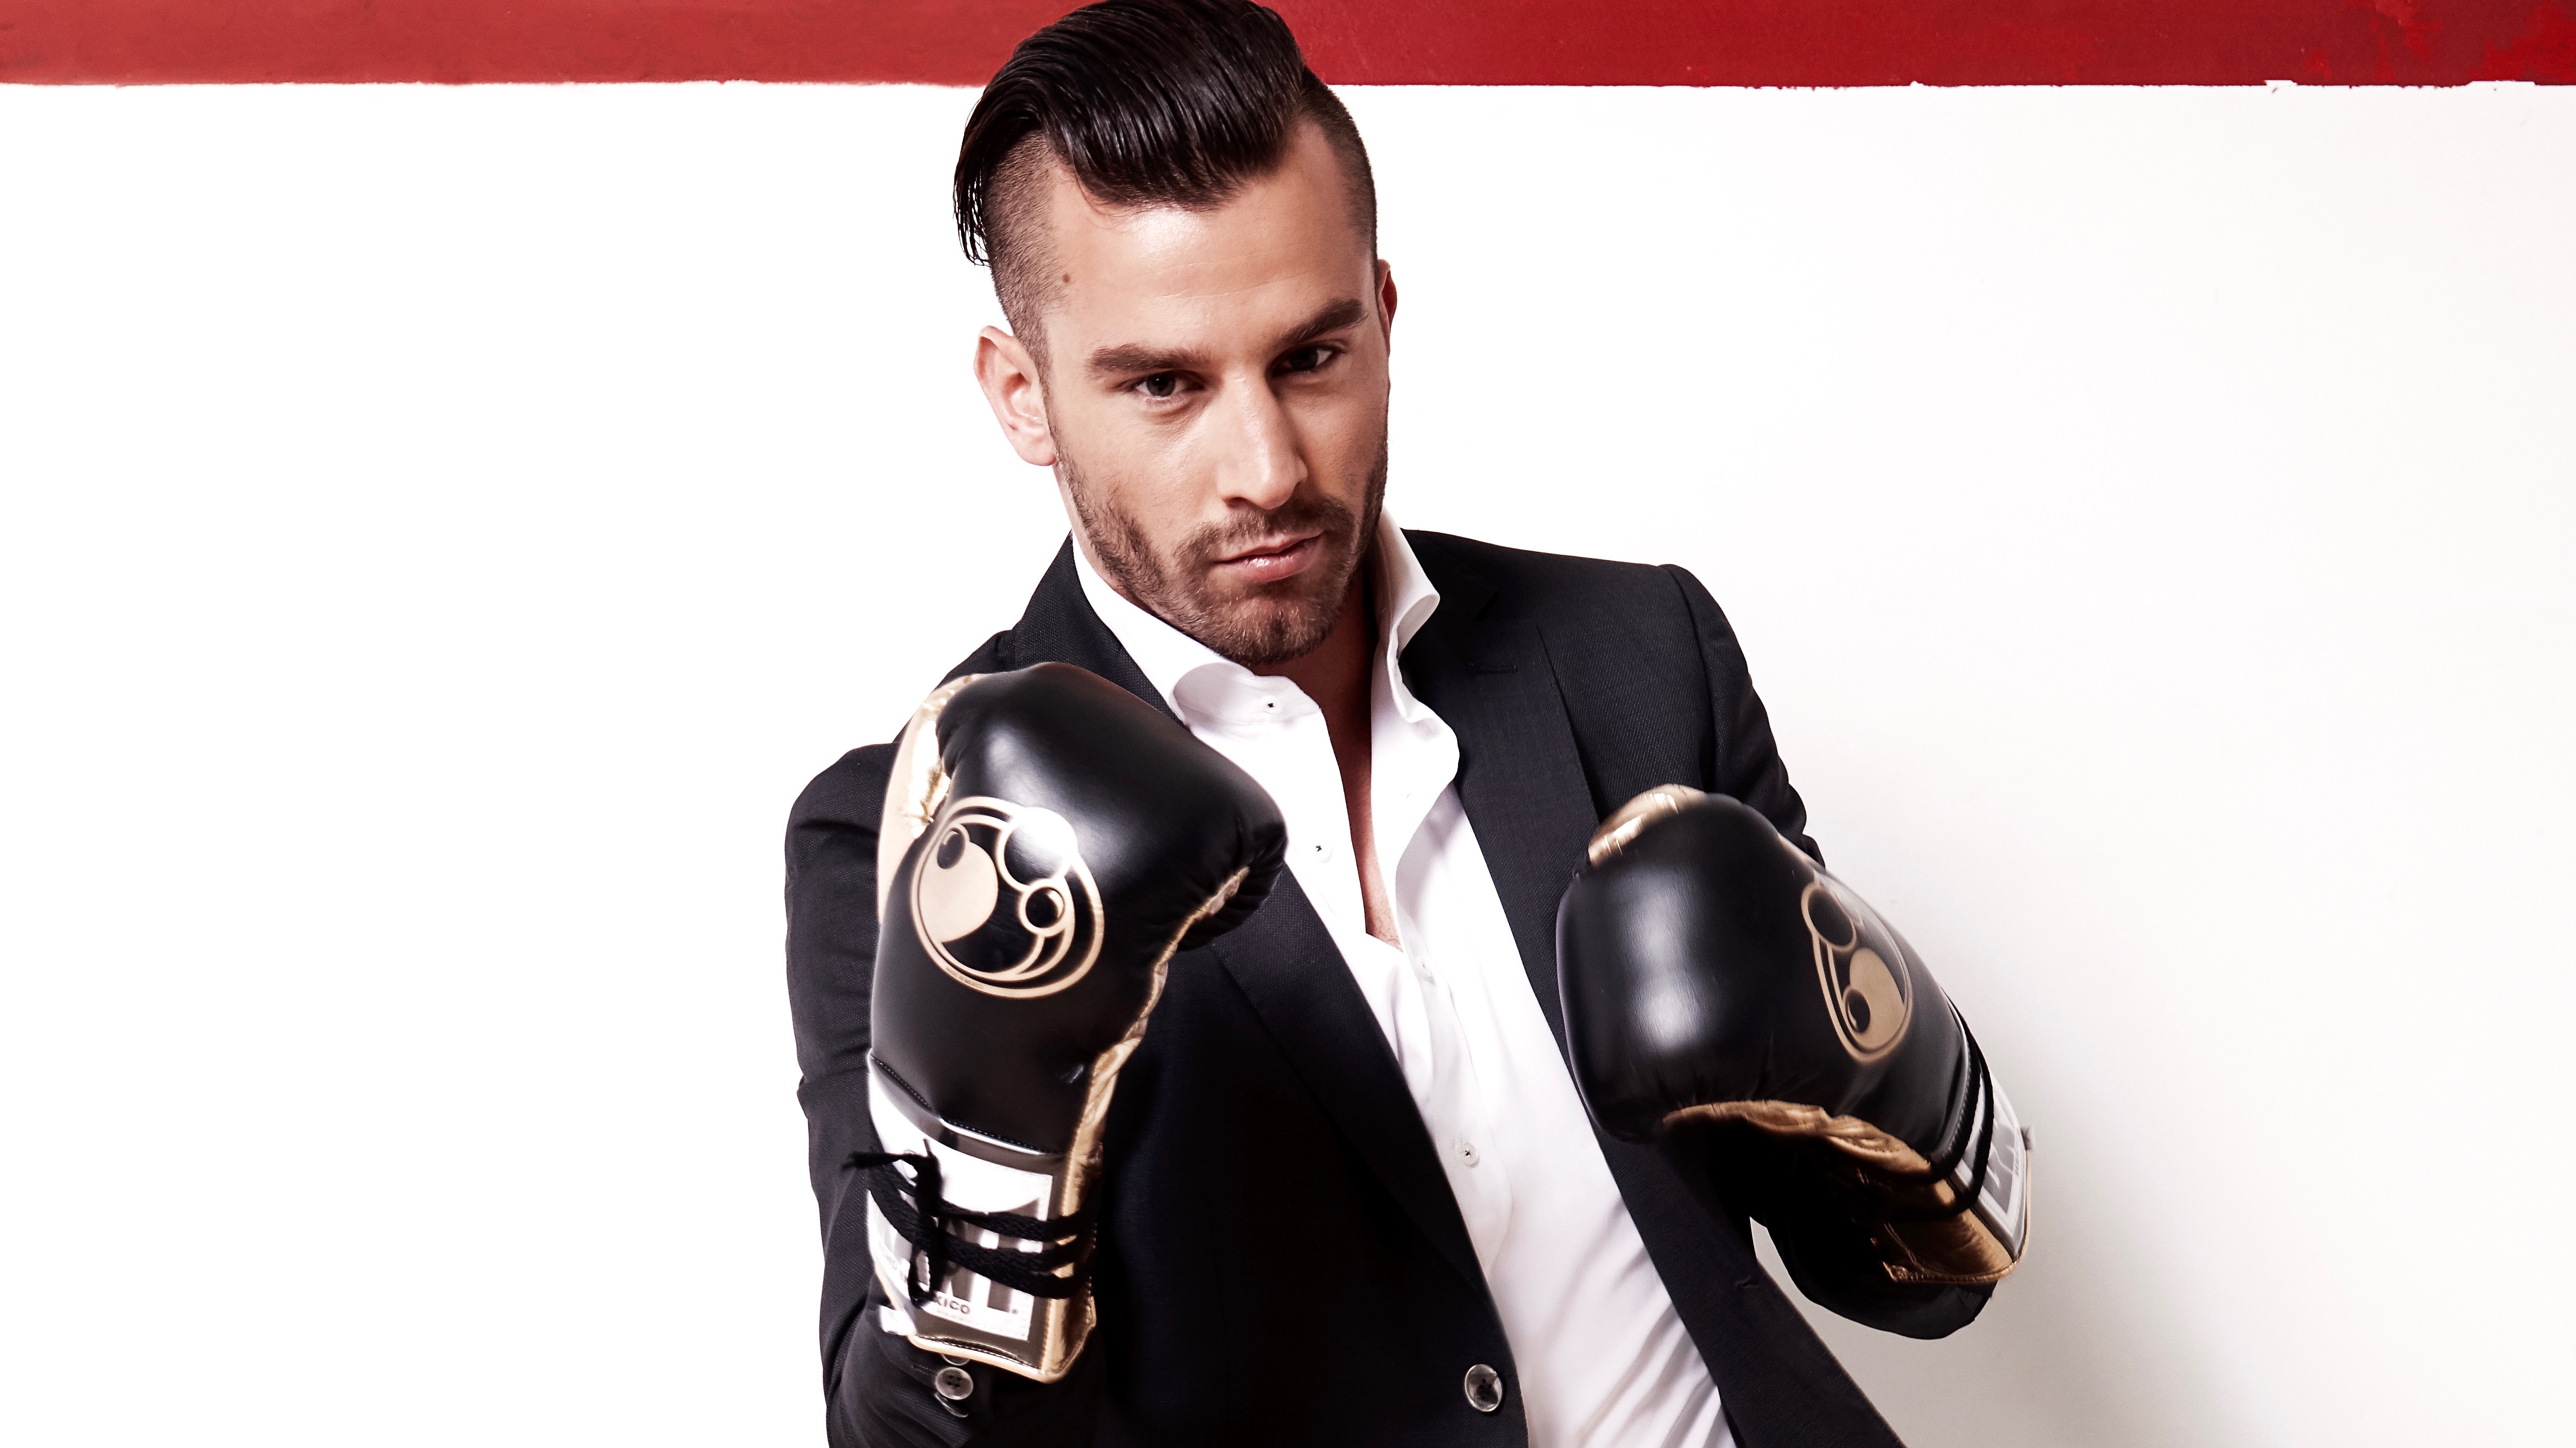 BOXING CHAMP DAVID LEMIEUX DELIVERS THE FITNESS 411 ...